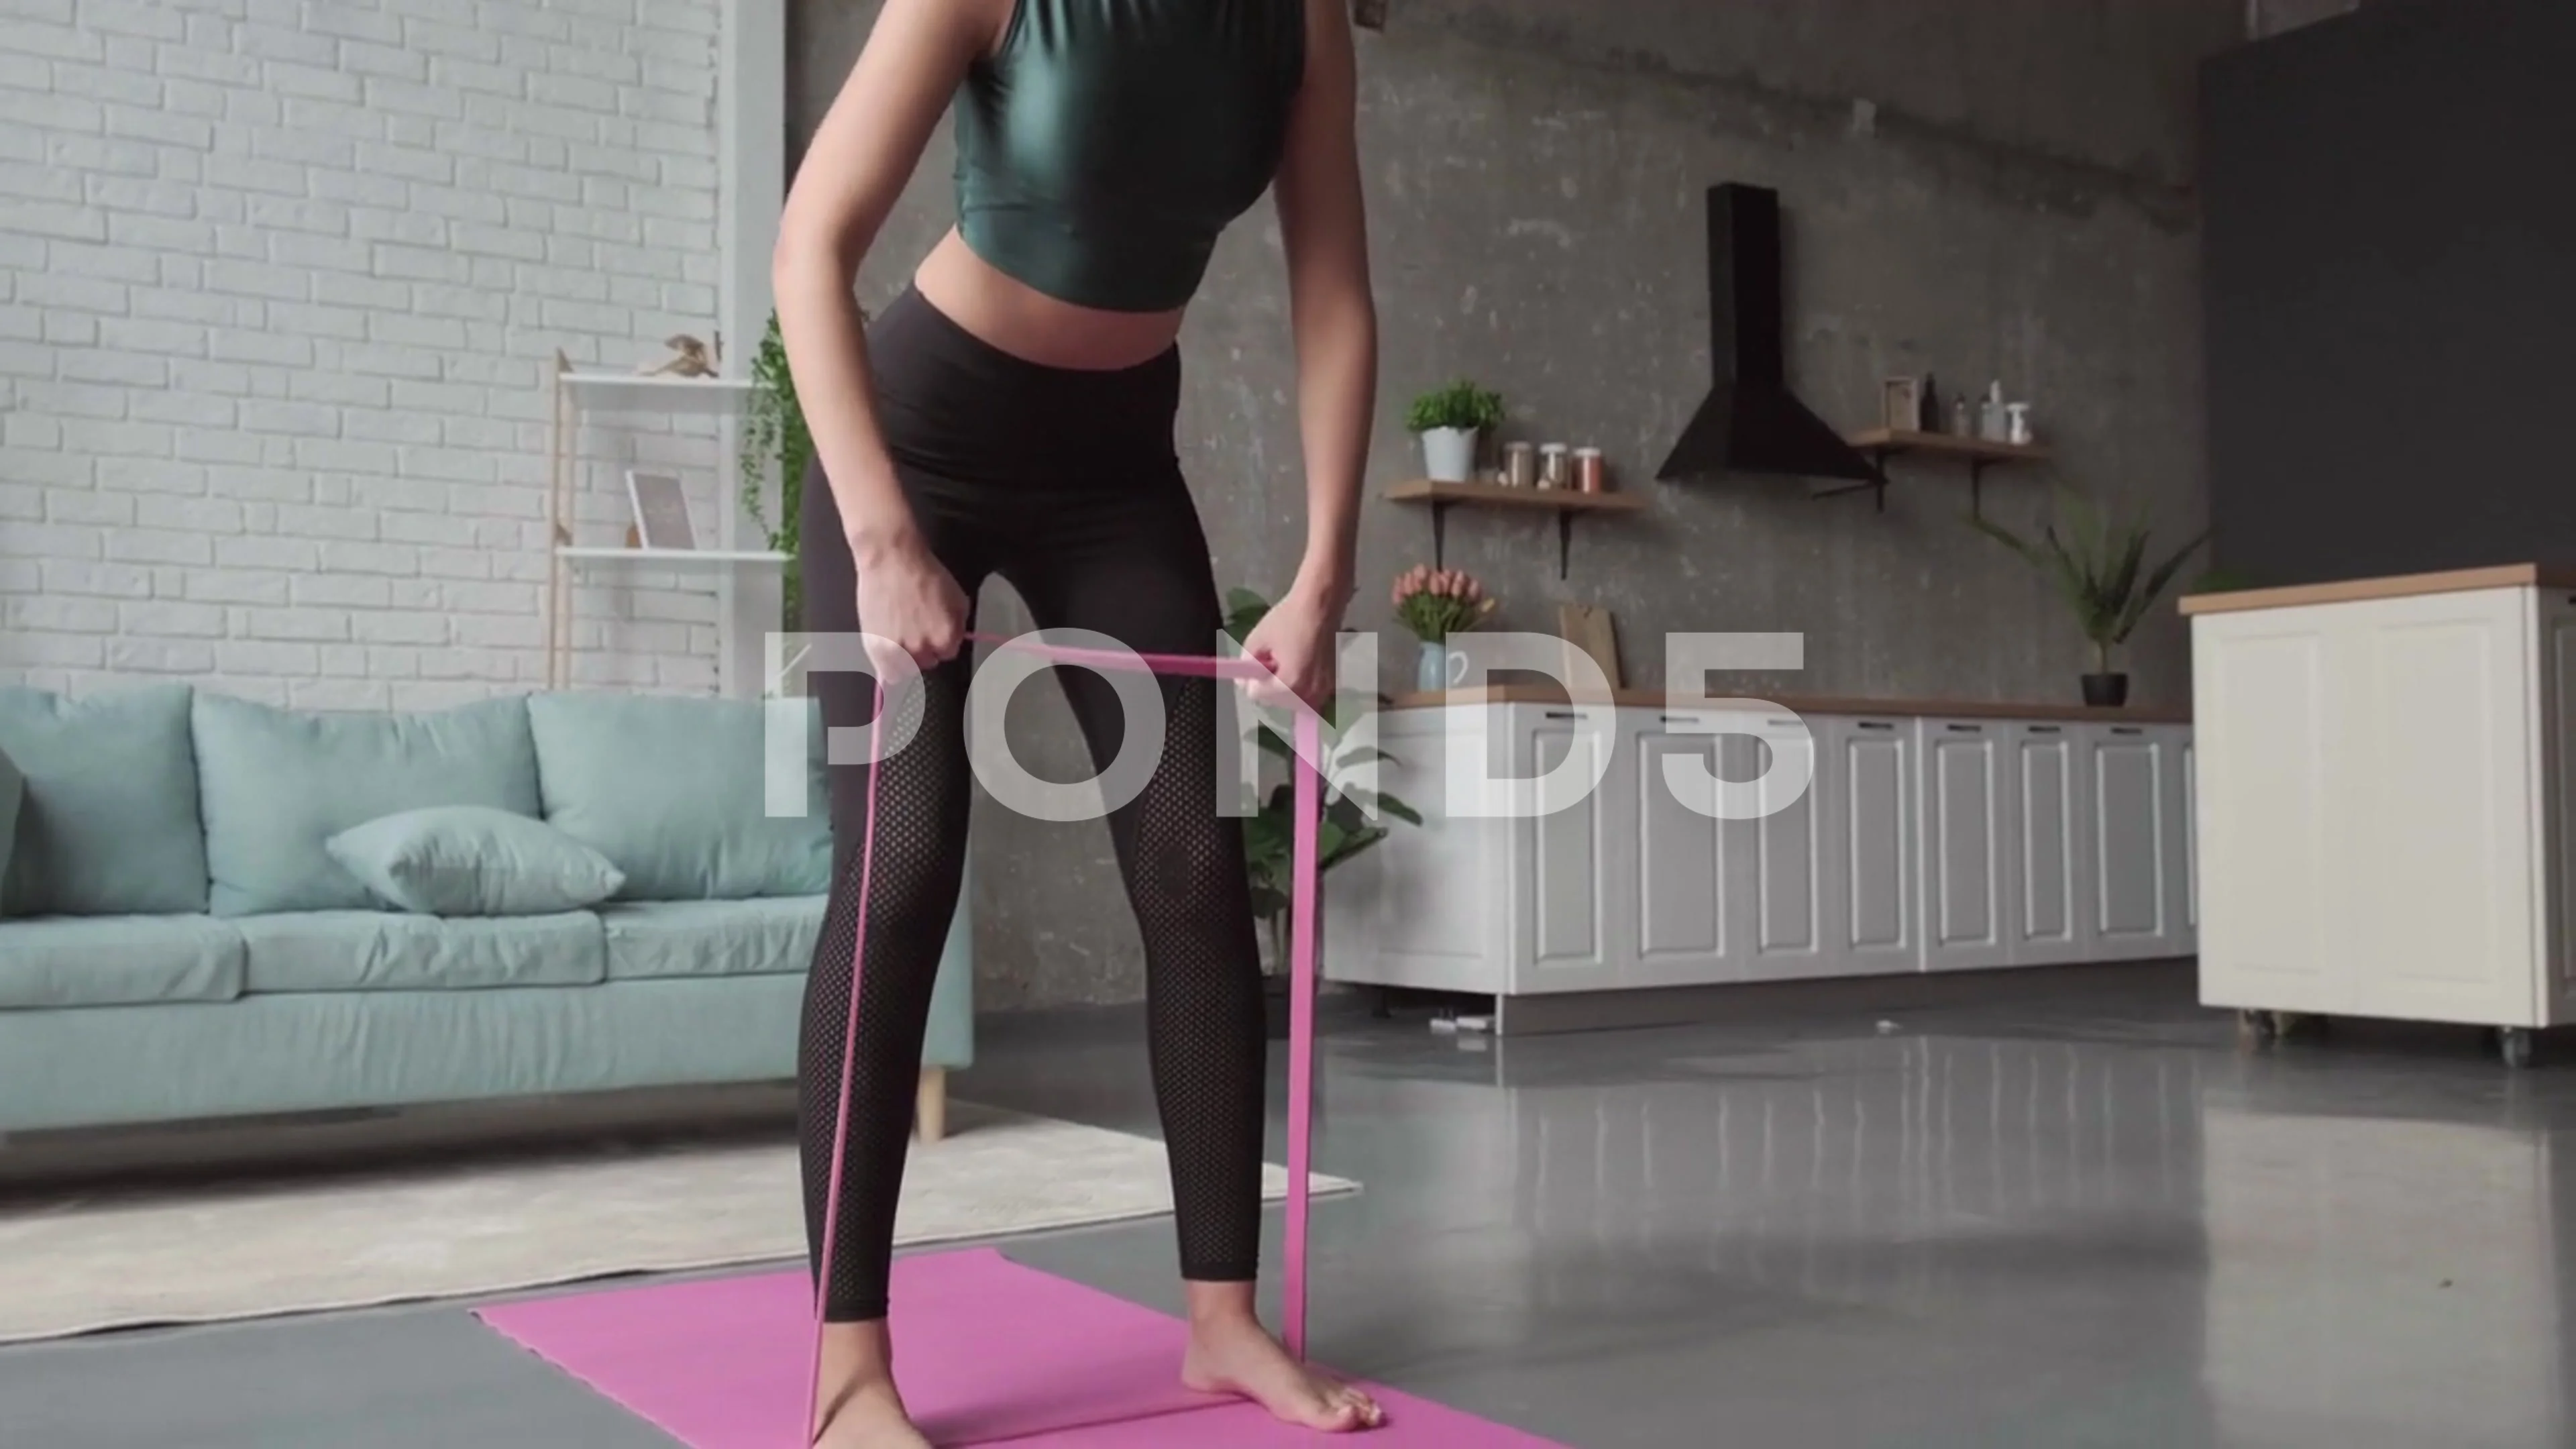 Resistance band exercises: videos & illustrations